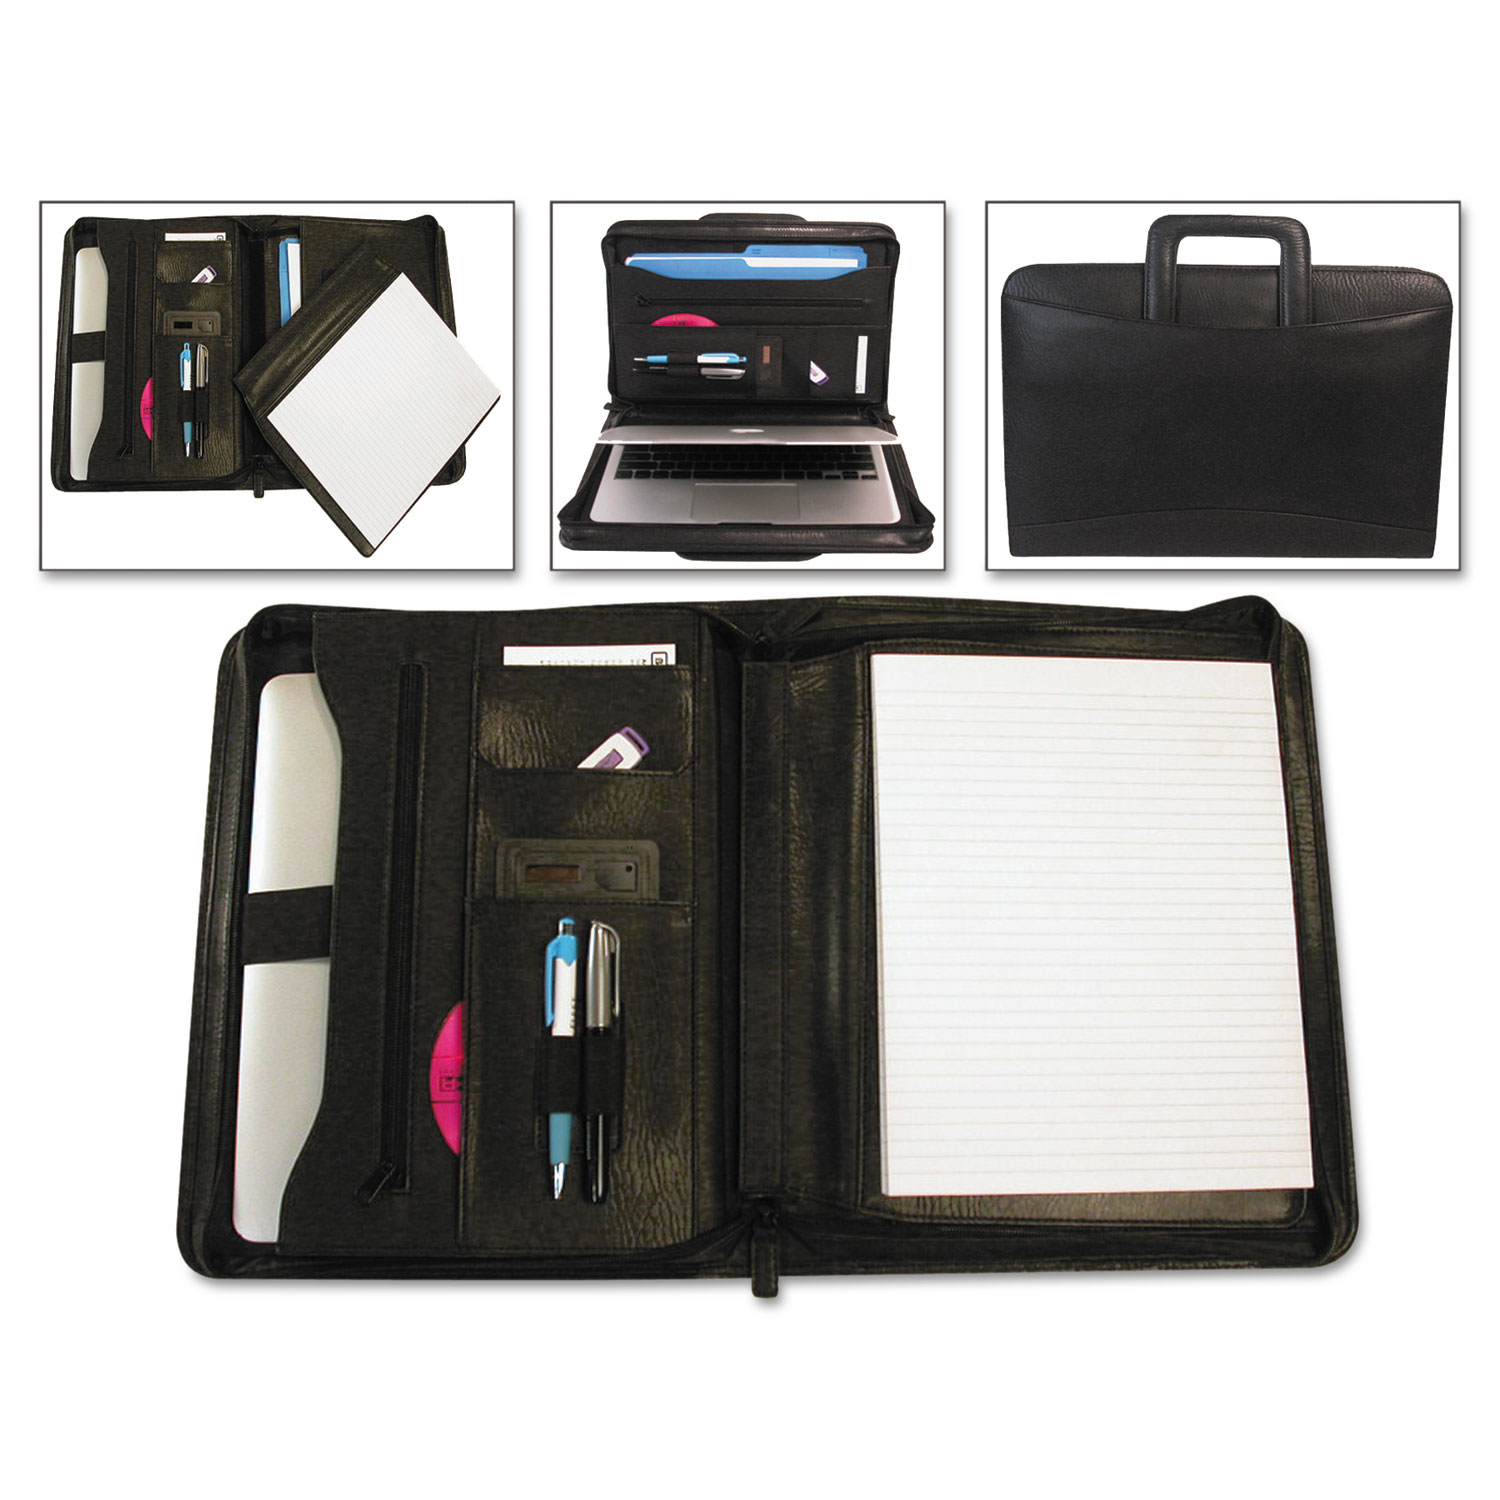 Tablet Organizer with Removable Pad Holder, 14 1/4 x 2 1/2 x 11 1/4, Black